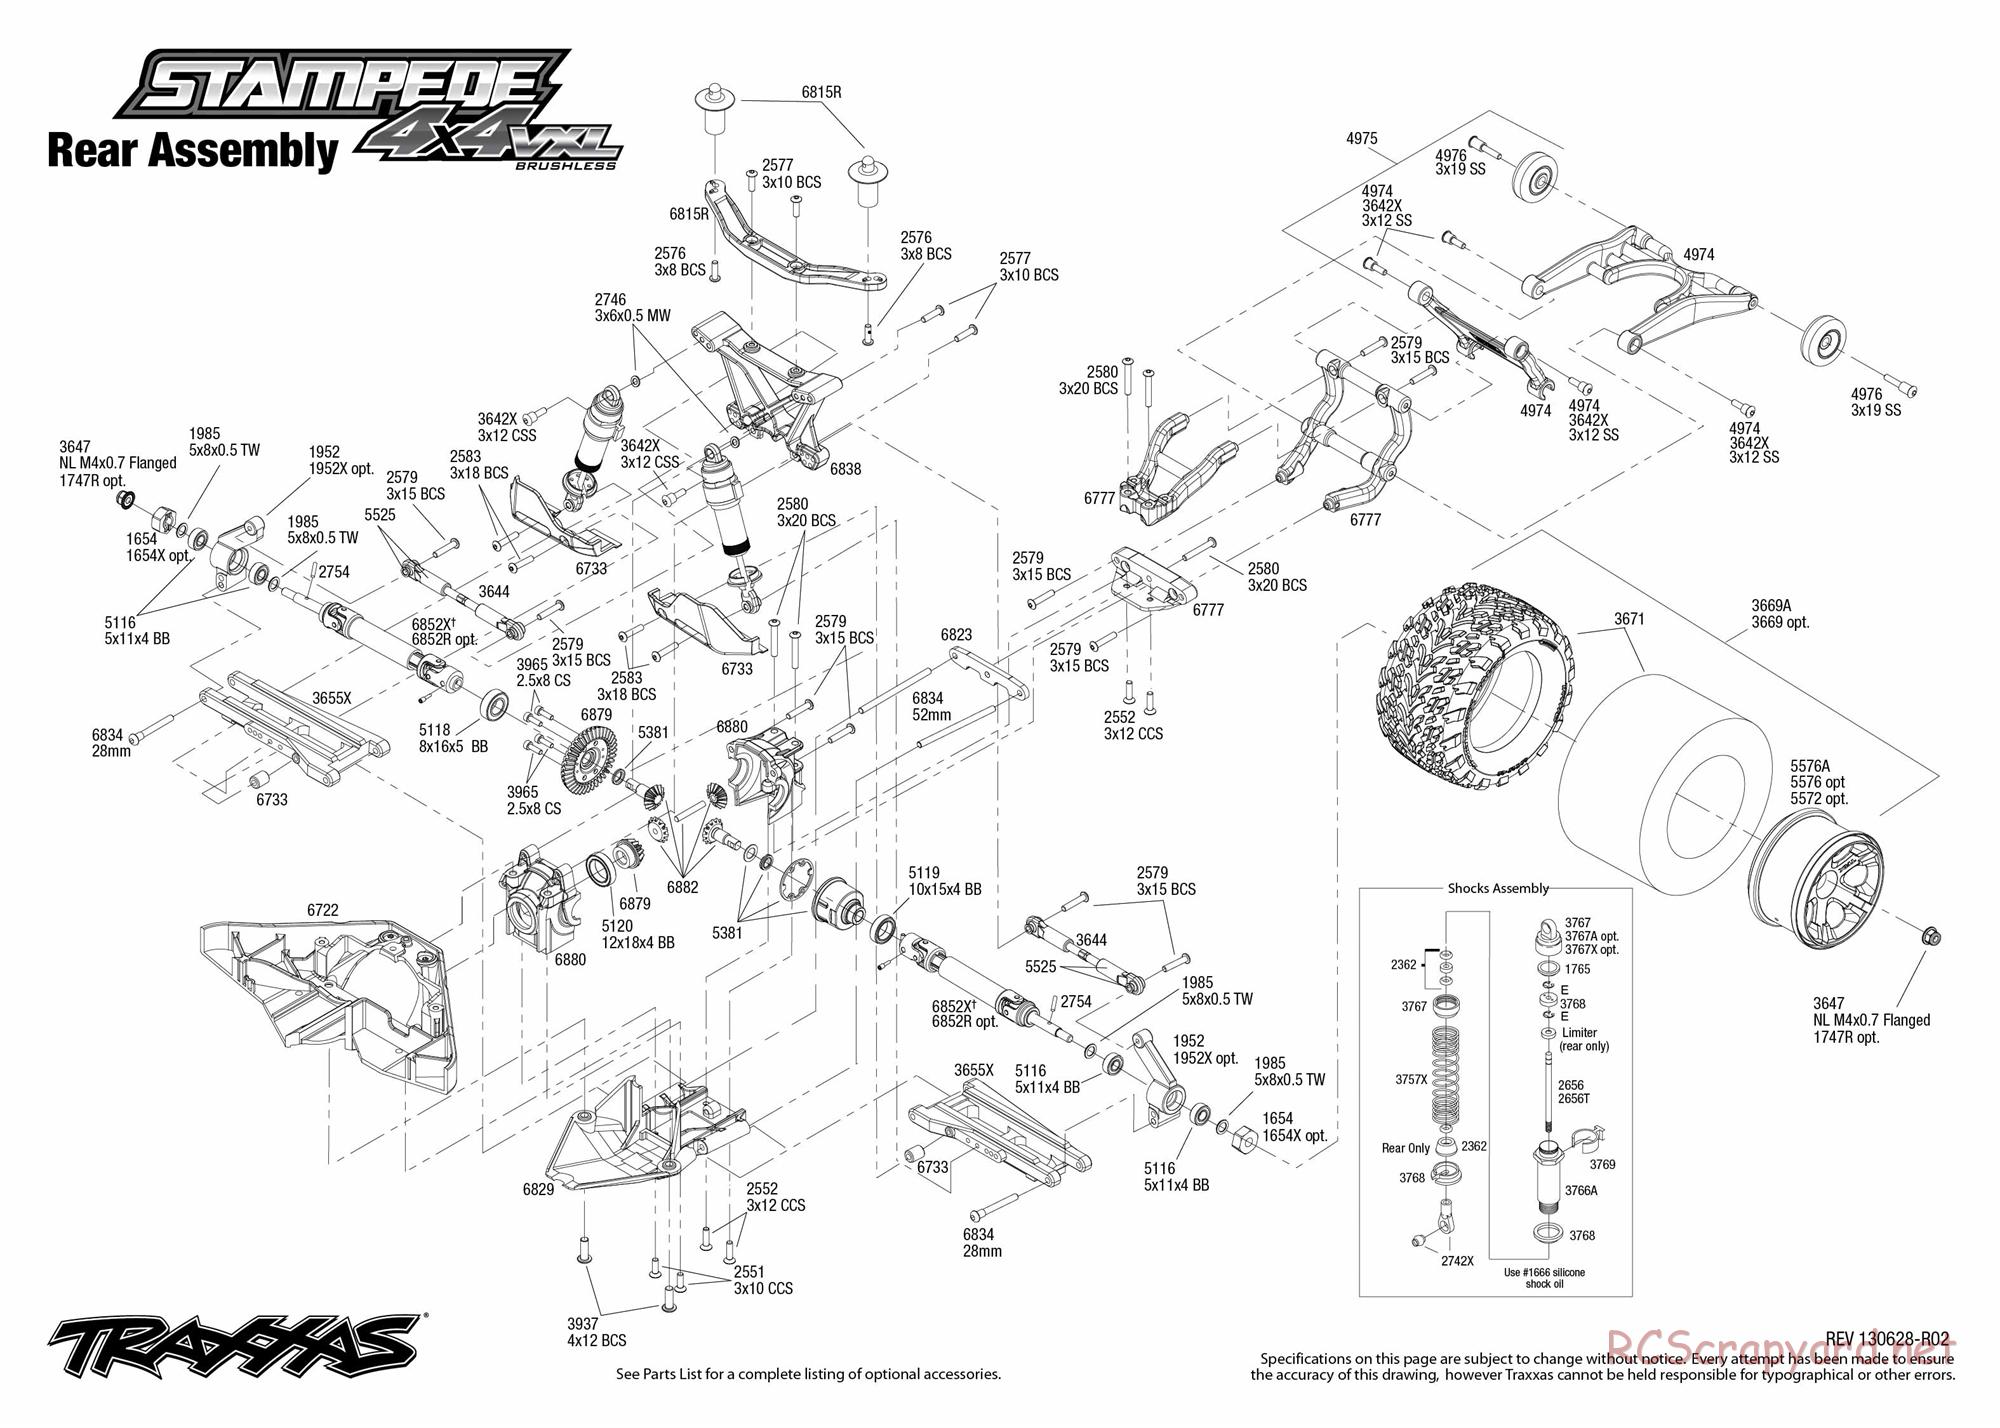 Traxxas - Stampede 4x4 VXL (2012) - Exploded Views - Page 4